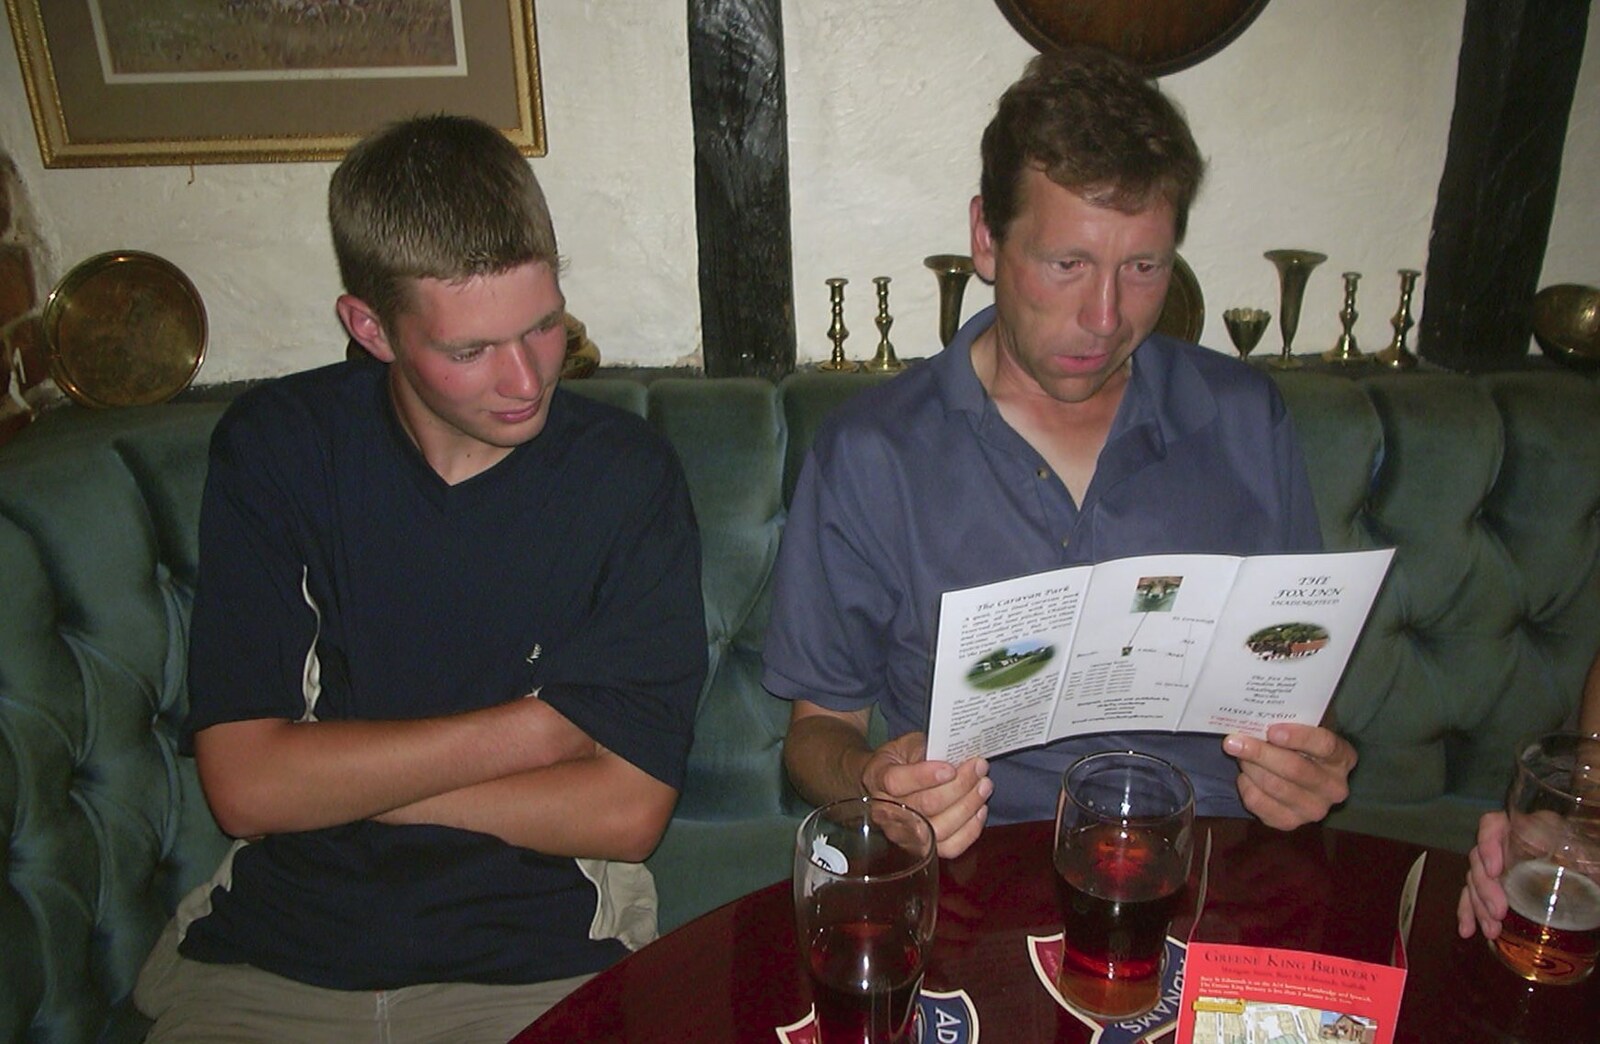 Apple persuses the menu from A BSCC Camping Trip to the Fox Inn, Shadingfield, Suffolk - 9th August 2003